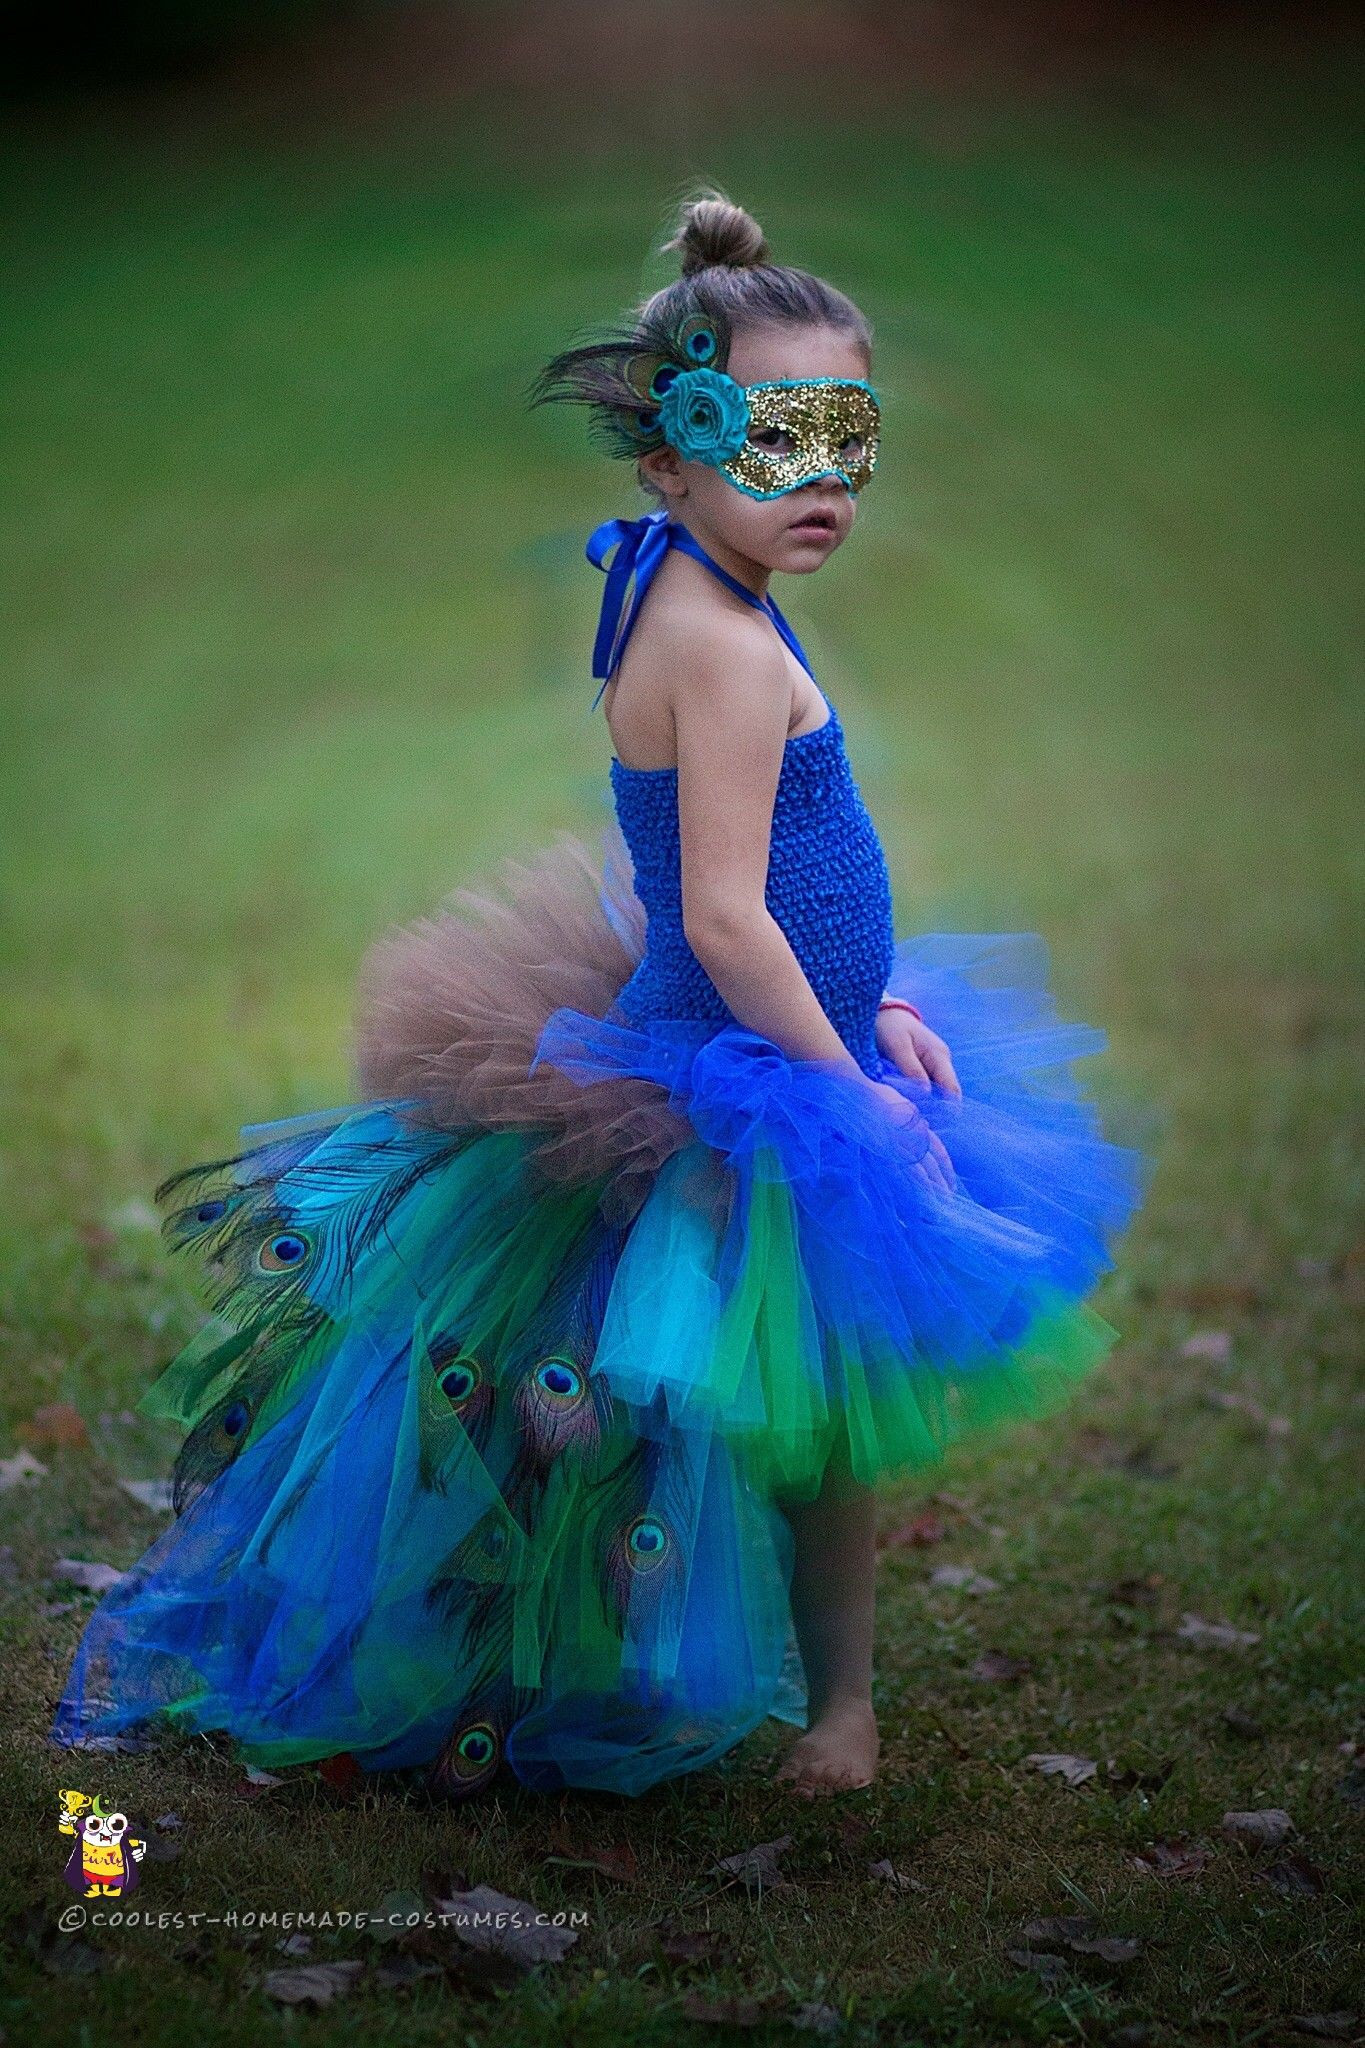 DIY Toddler Peacock Costume
 Pretty Homemade Peacock Costume for a Girl